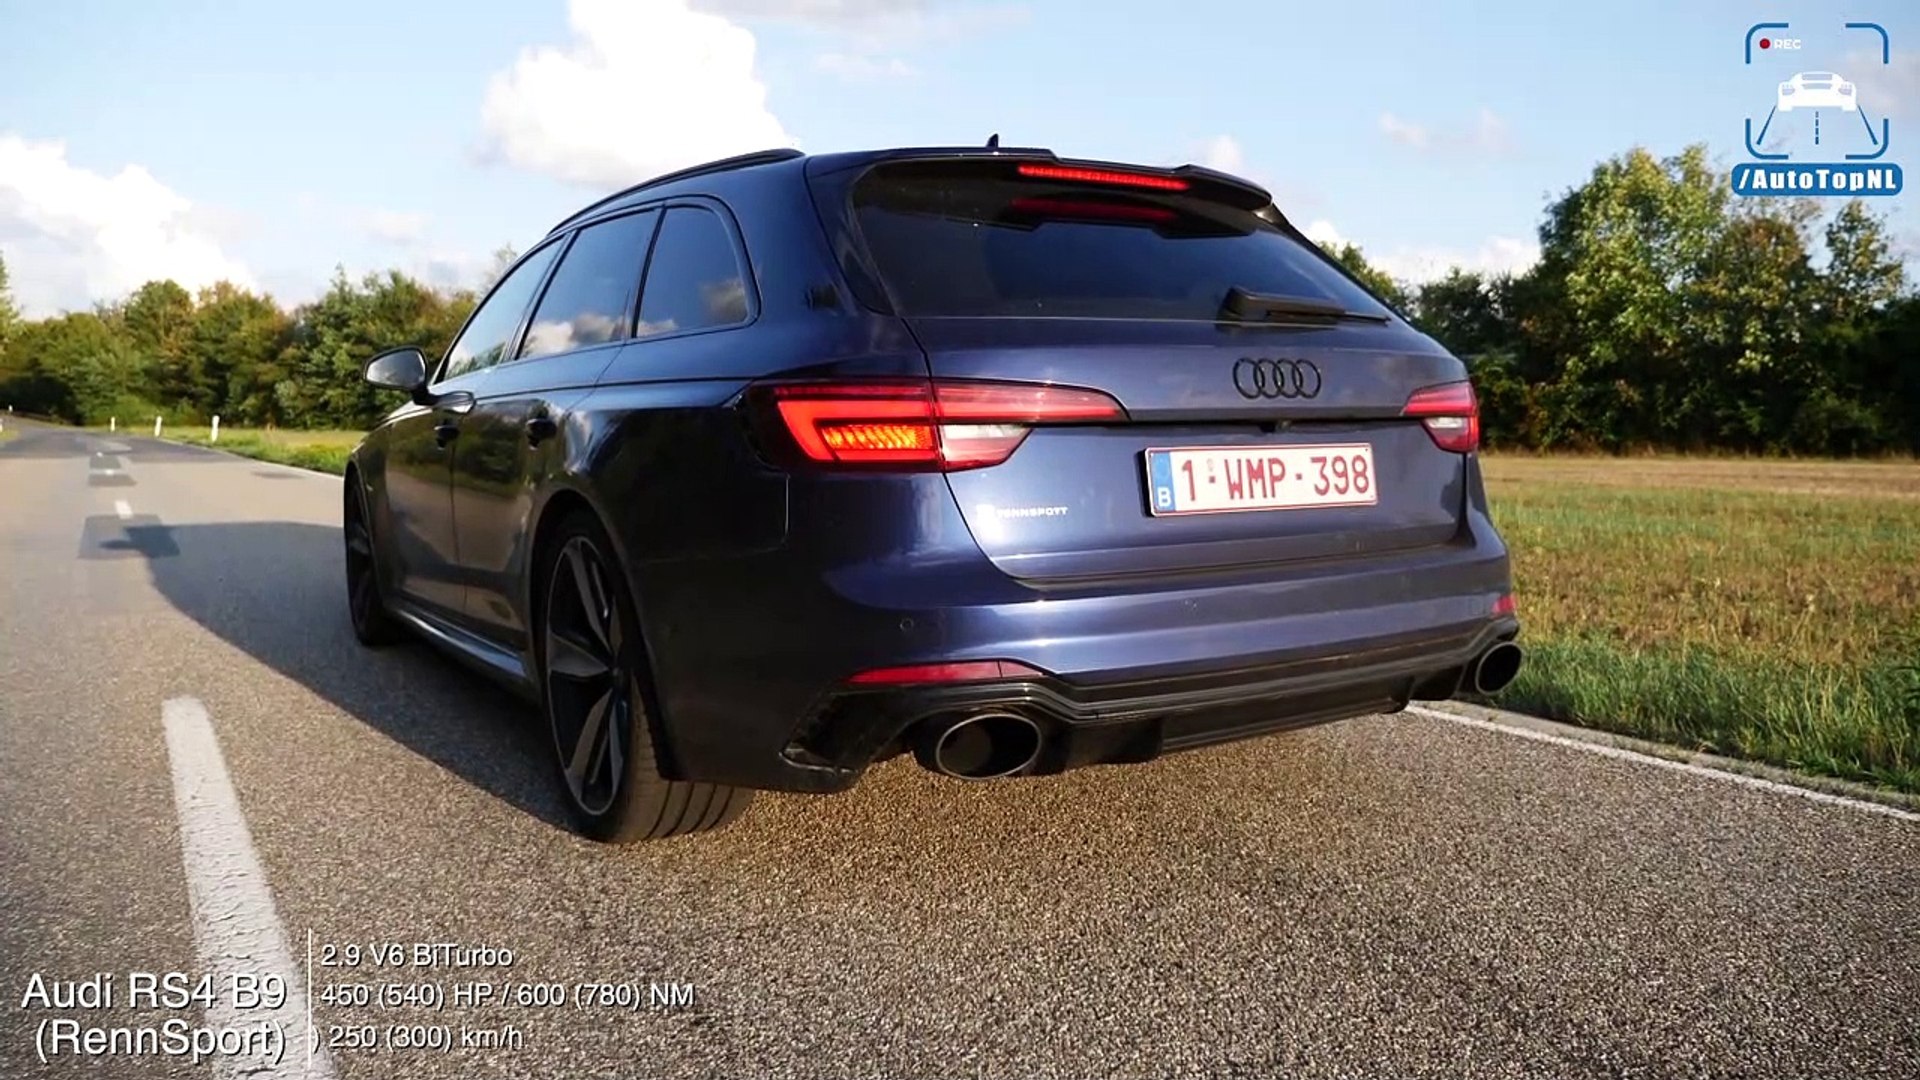 540HP AUDI RS4 B9 Rennsport 0-300km/h ACCELERATION by AutoTopNL